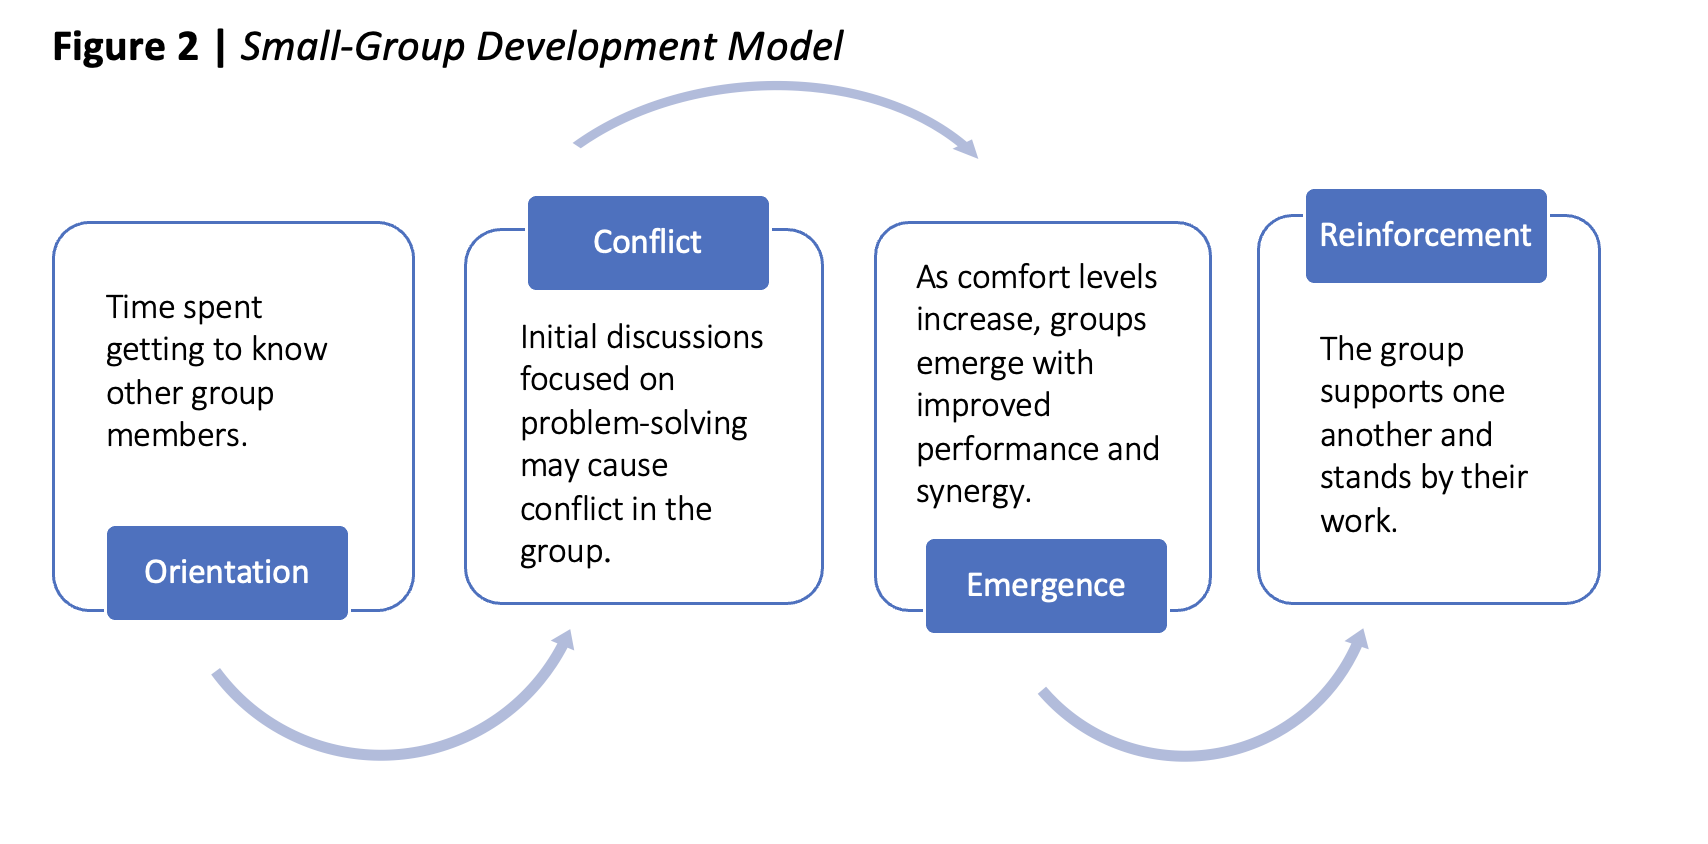 This image depicts the Small-Group Development Model.   Each stage is in a box (orientation, conflict, emergence, reinforcement) with an arrow going from the box into the next stage.